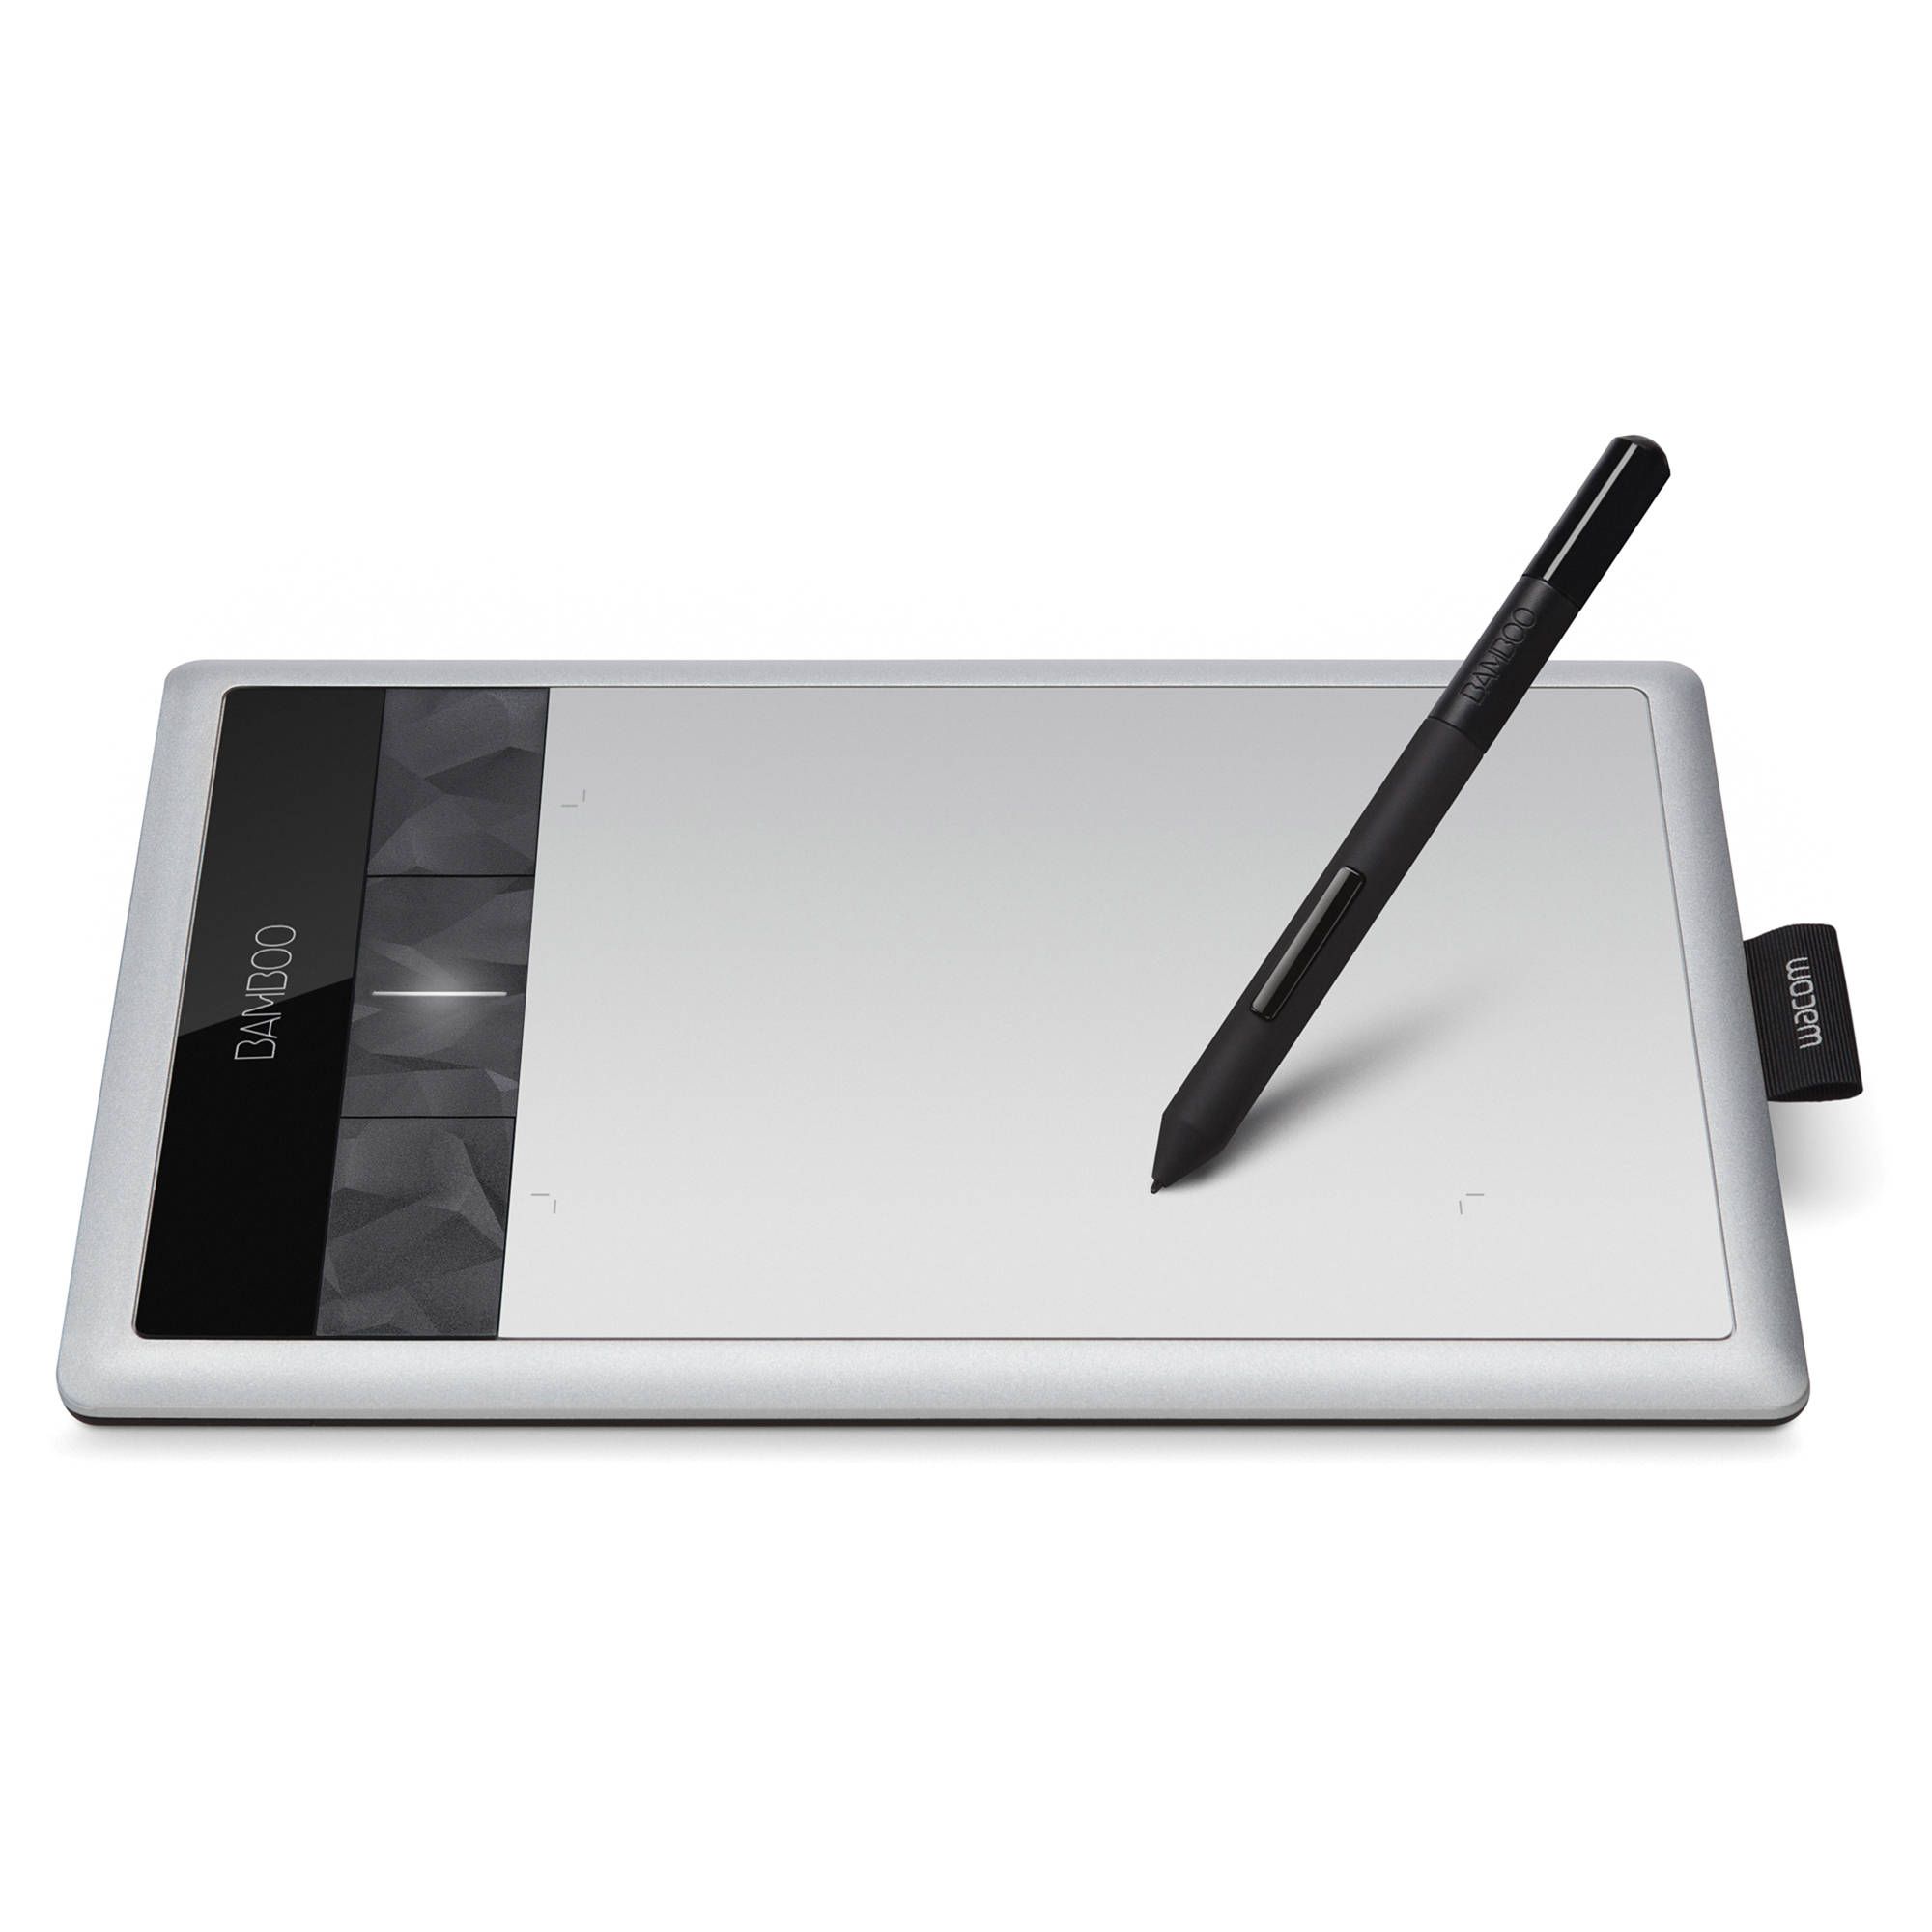 Minty reccomend Wacom bamboo fun pen and touch drivers